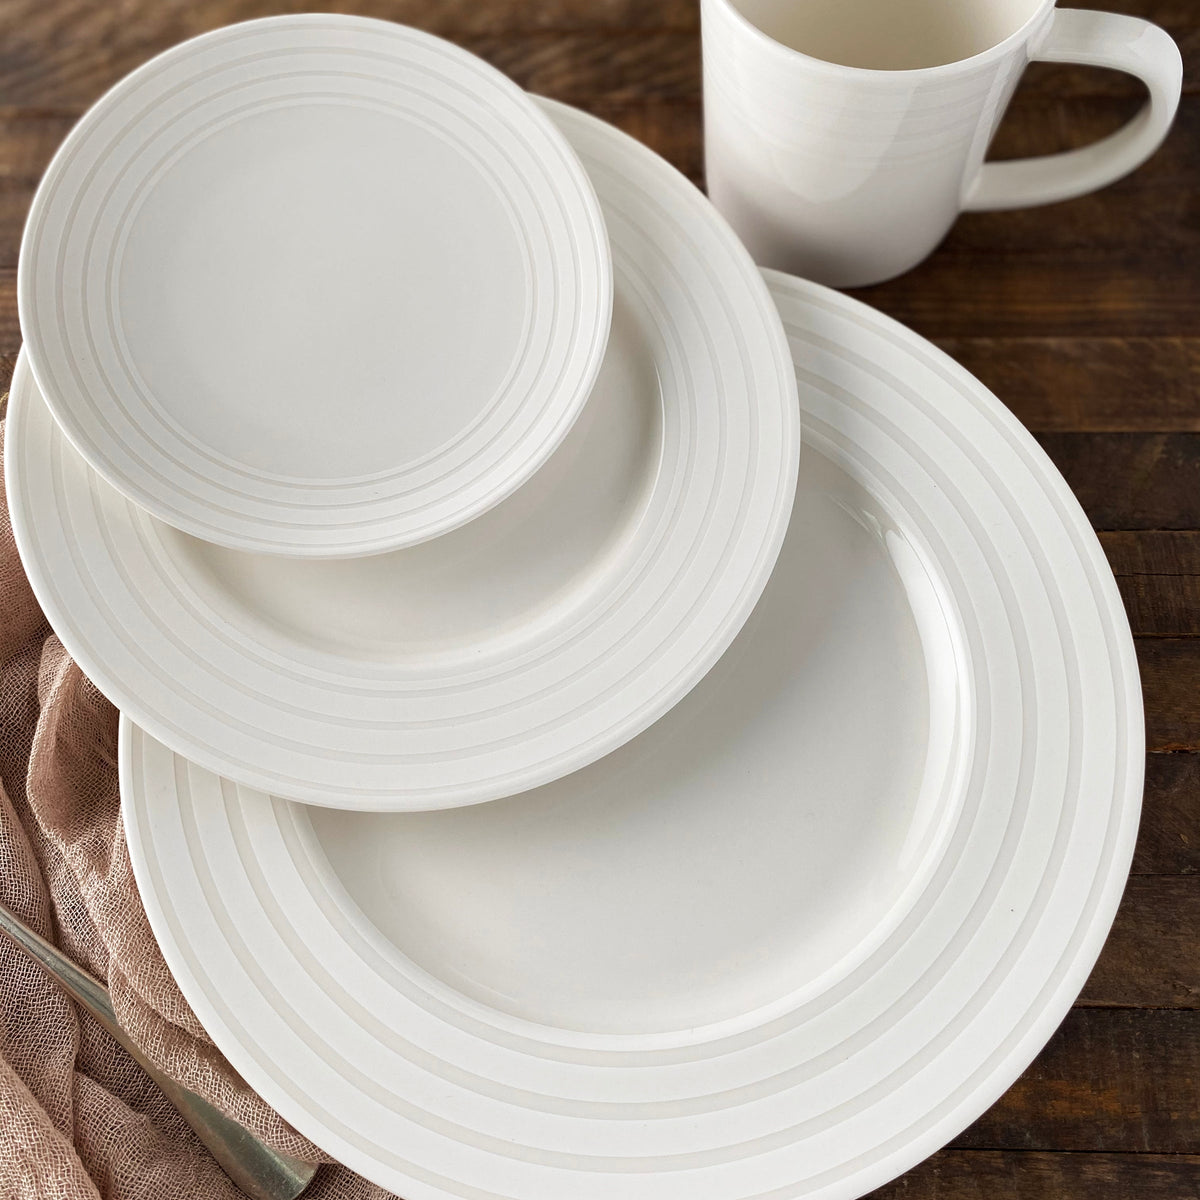 A Cambridge Stripe Rimmed Salad Plate by Caskata Artisanal Home, including a mug, small plate, medium salad plate, and large plate, arranged on a wooden surface with a pink cloth napkin.